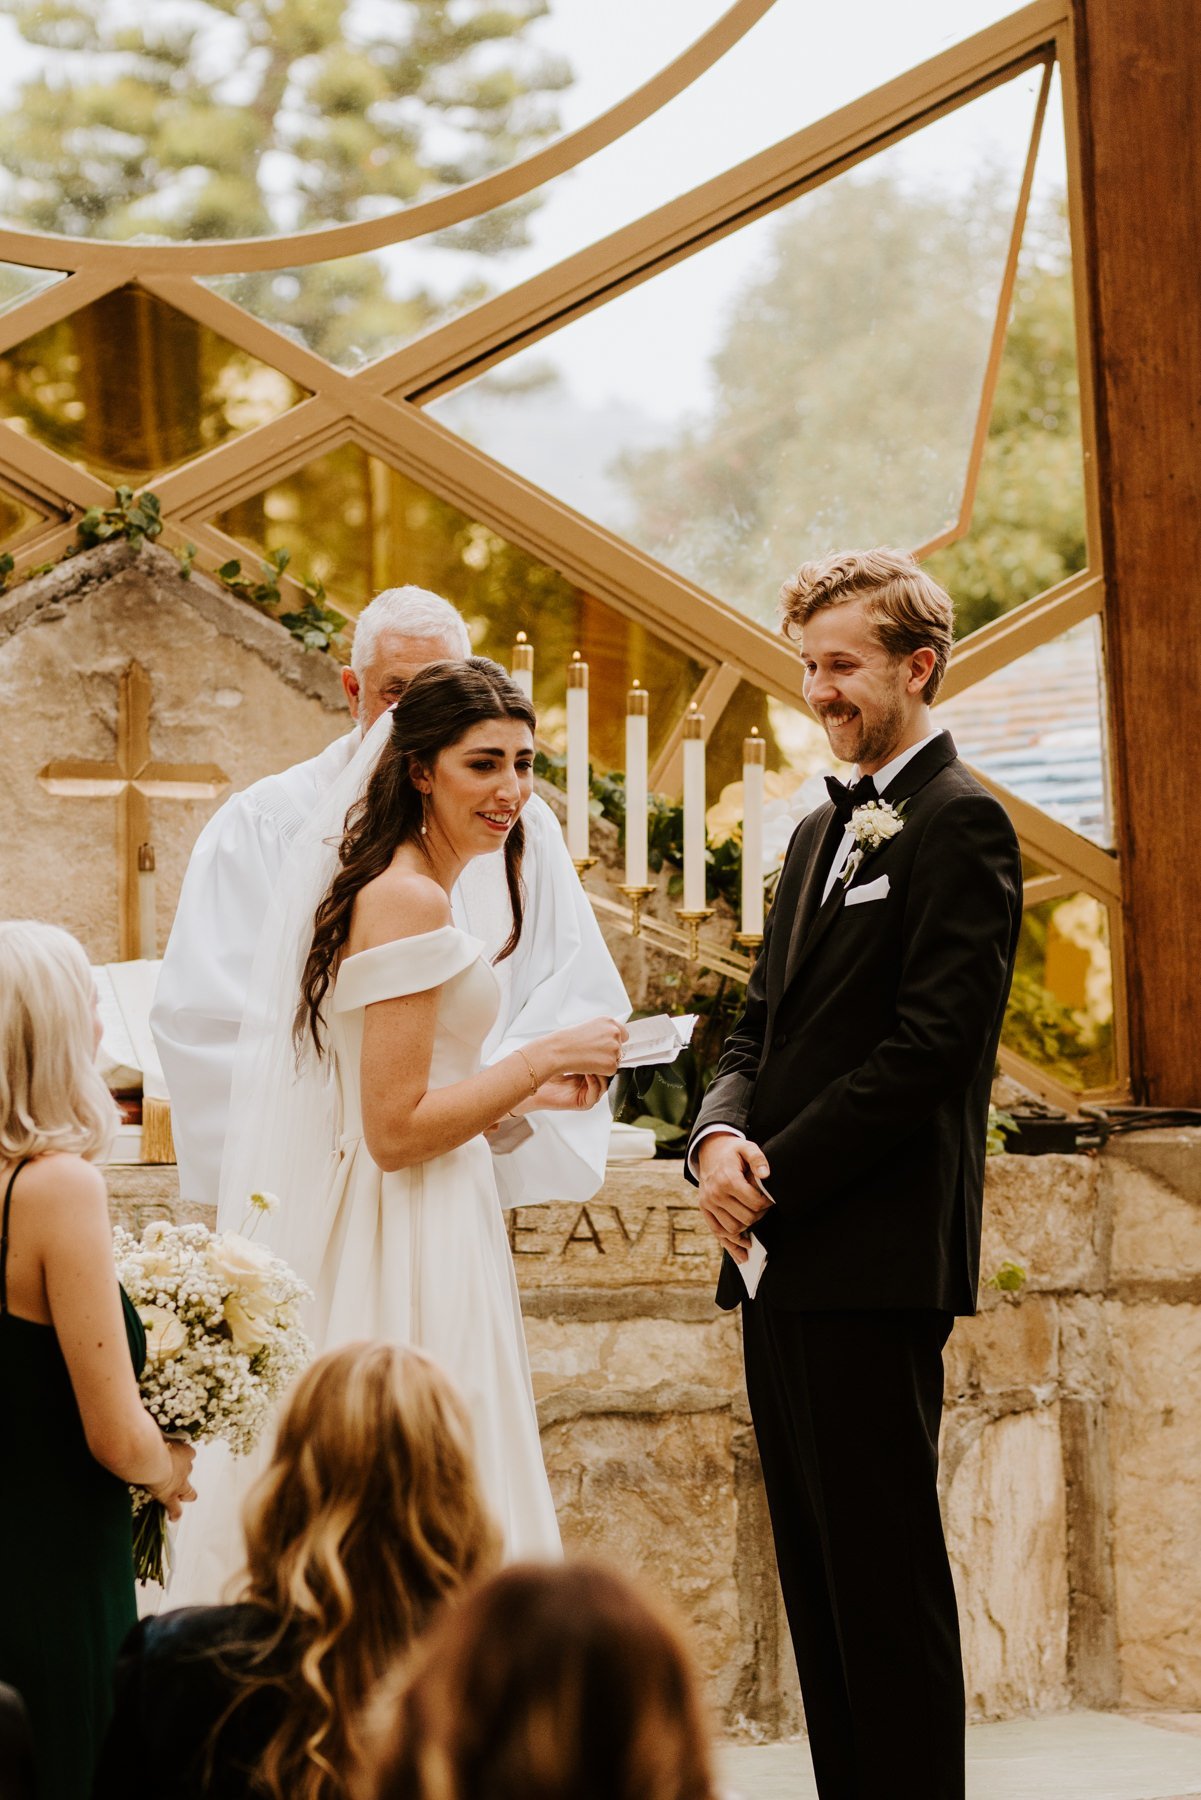 Bride and Groom Vows at Wedding Ceremony at Wayfarers Chapel, Photo by Tida Svy, Los Angeles Wedding Photographer